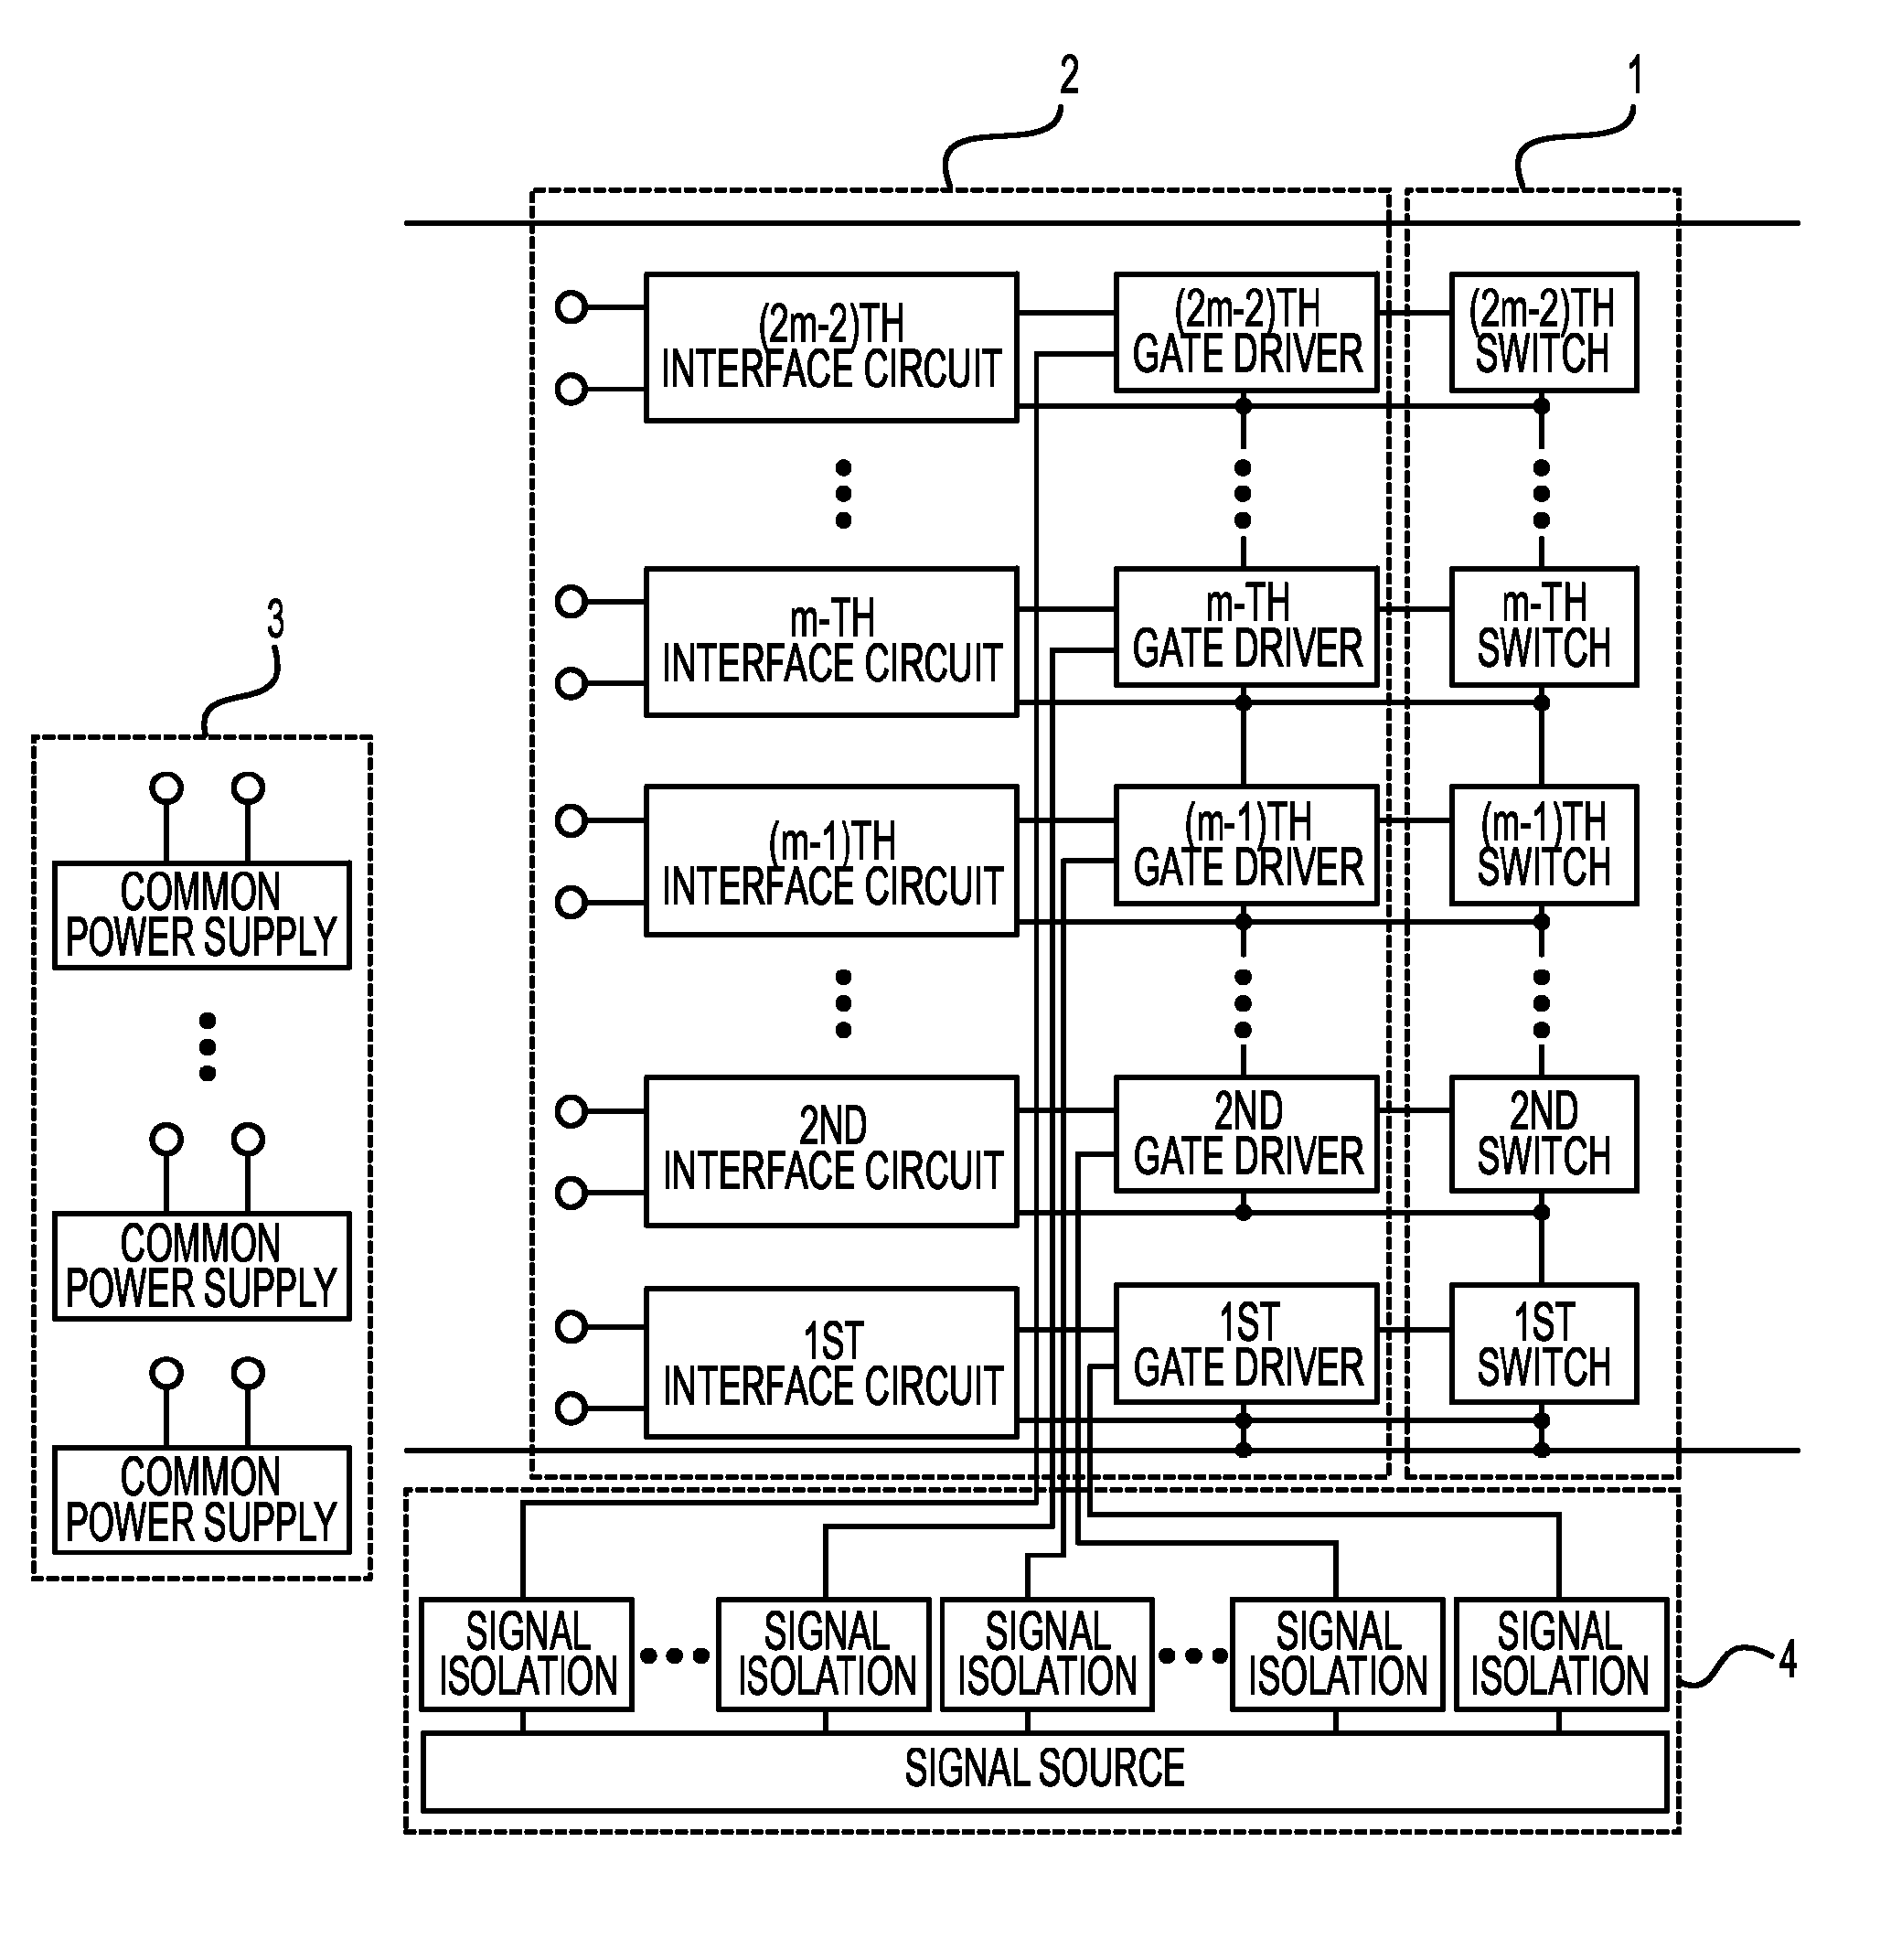 Power conversion apparatus with M conversion levels having an individual drive unit that does not require a dedicated power supply